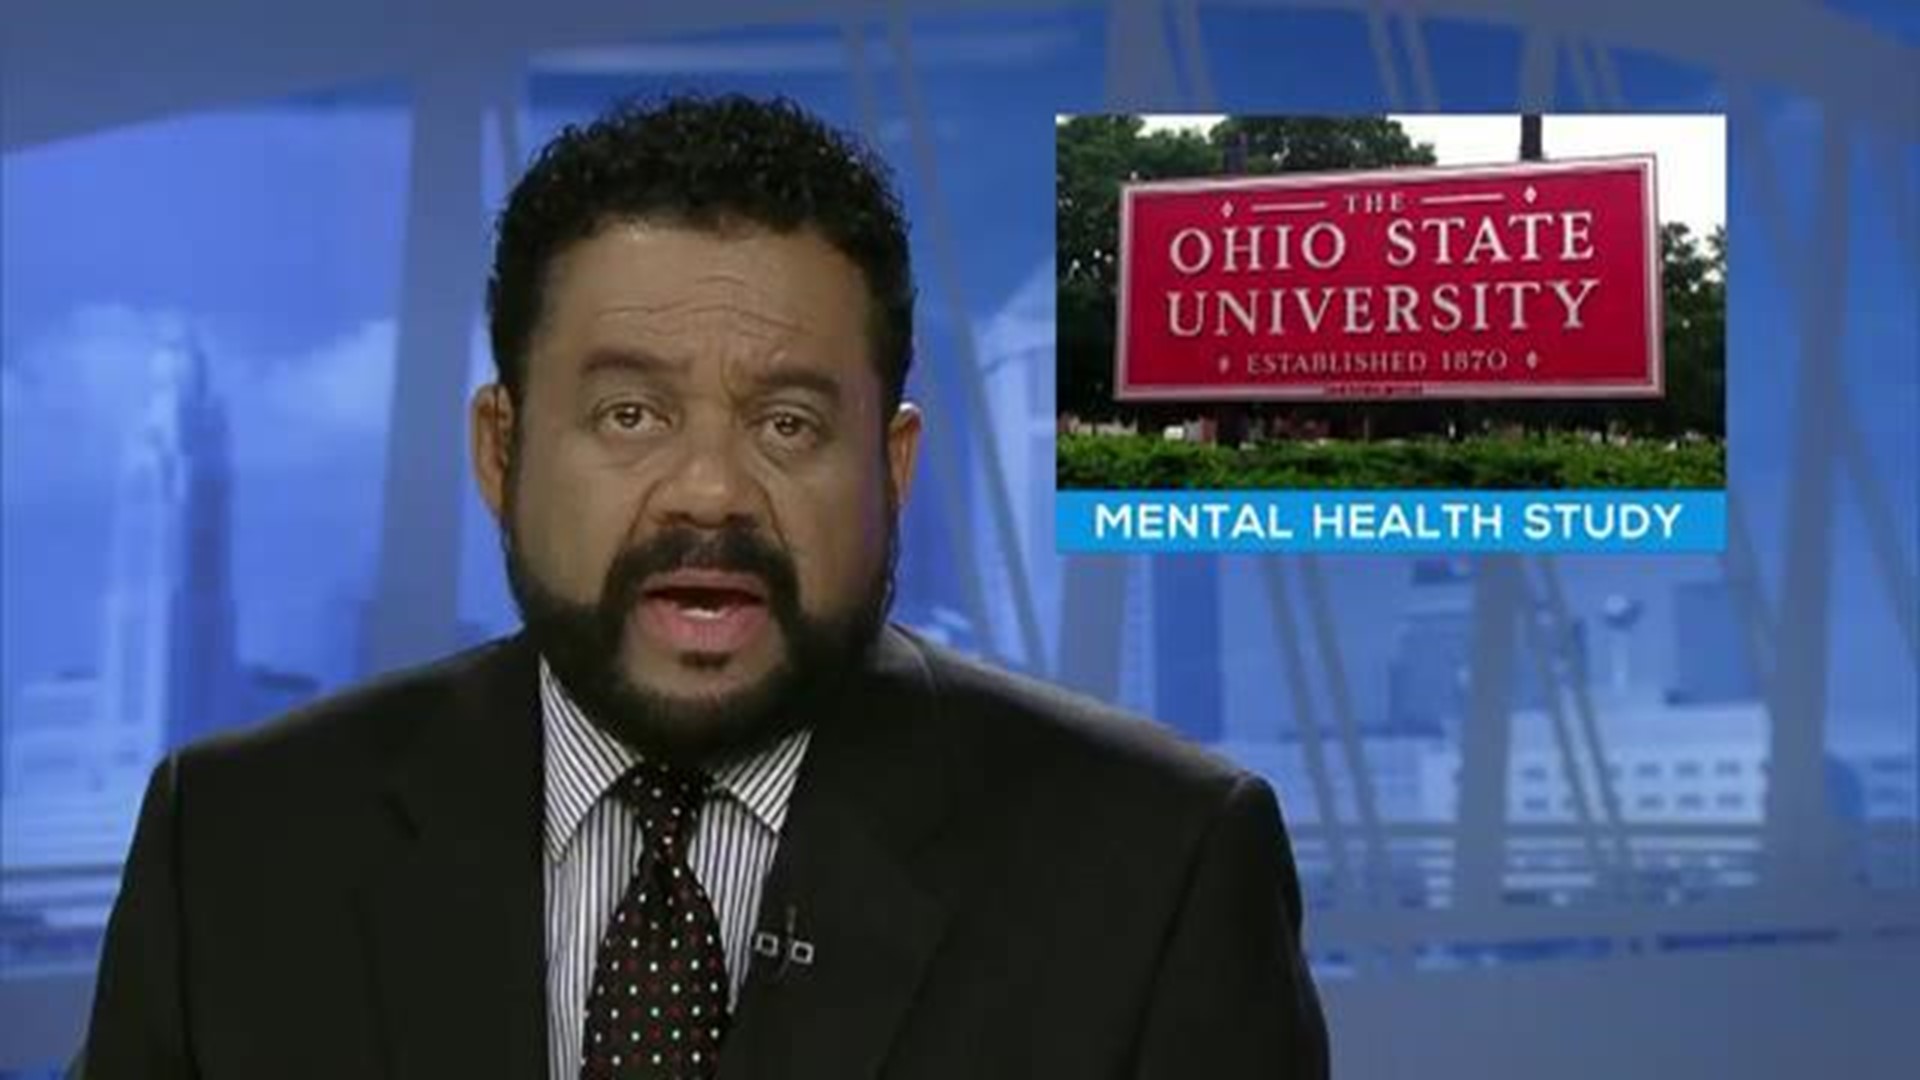 OSU Mental Health, Suicide Prevention Task Force releases recommendations